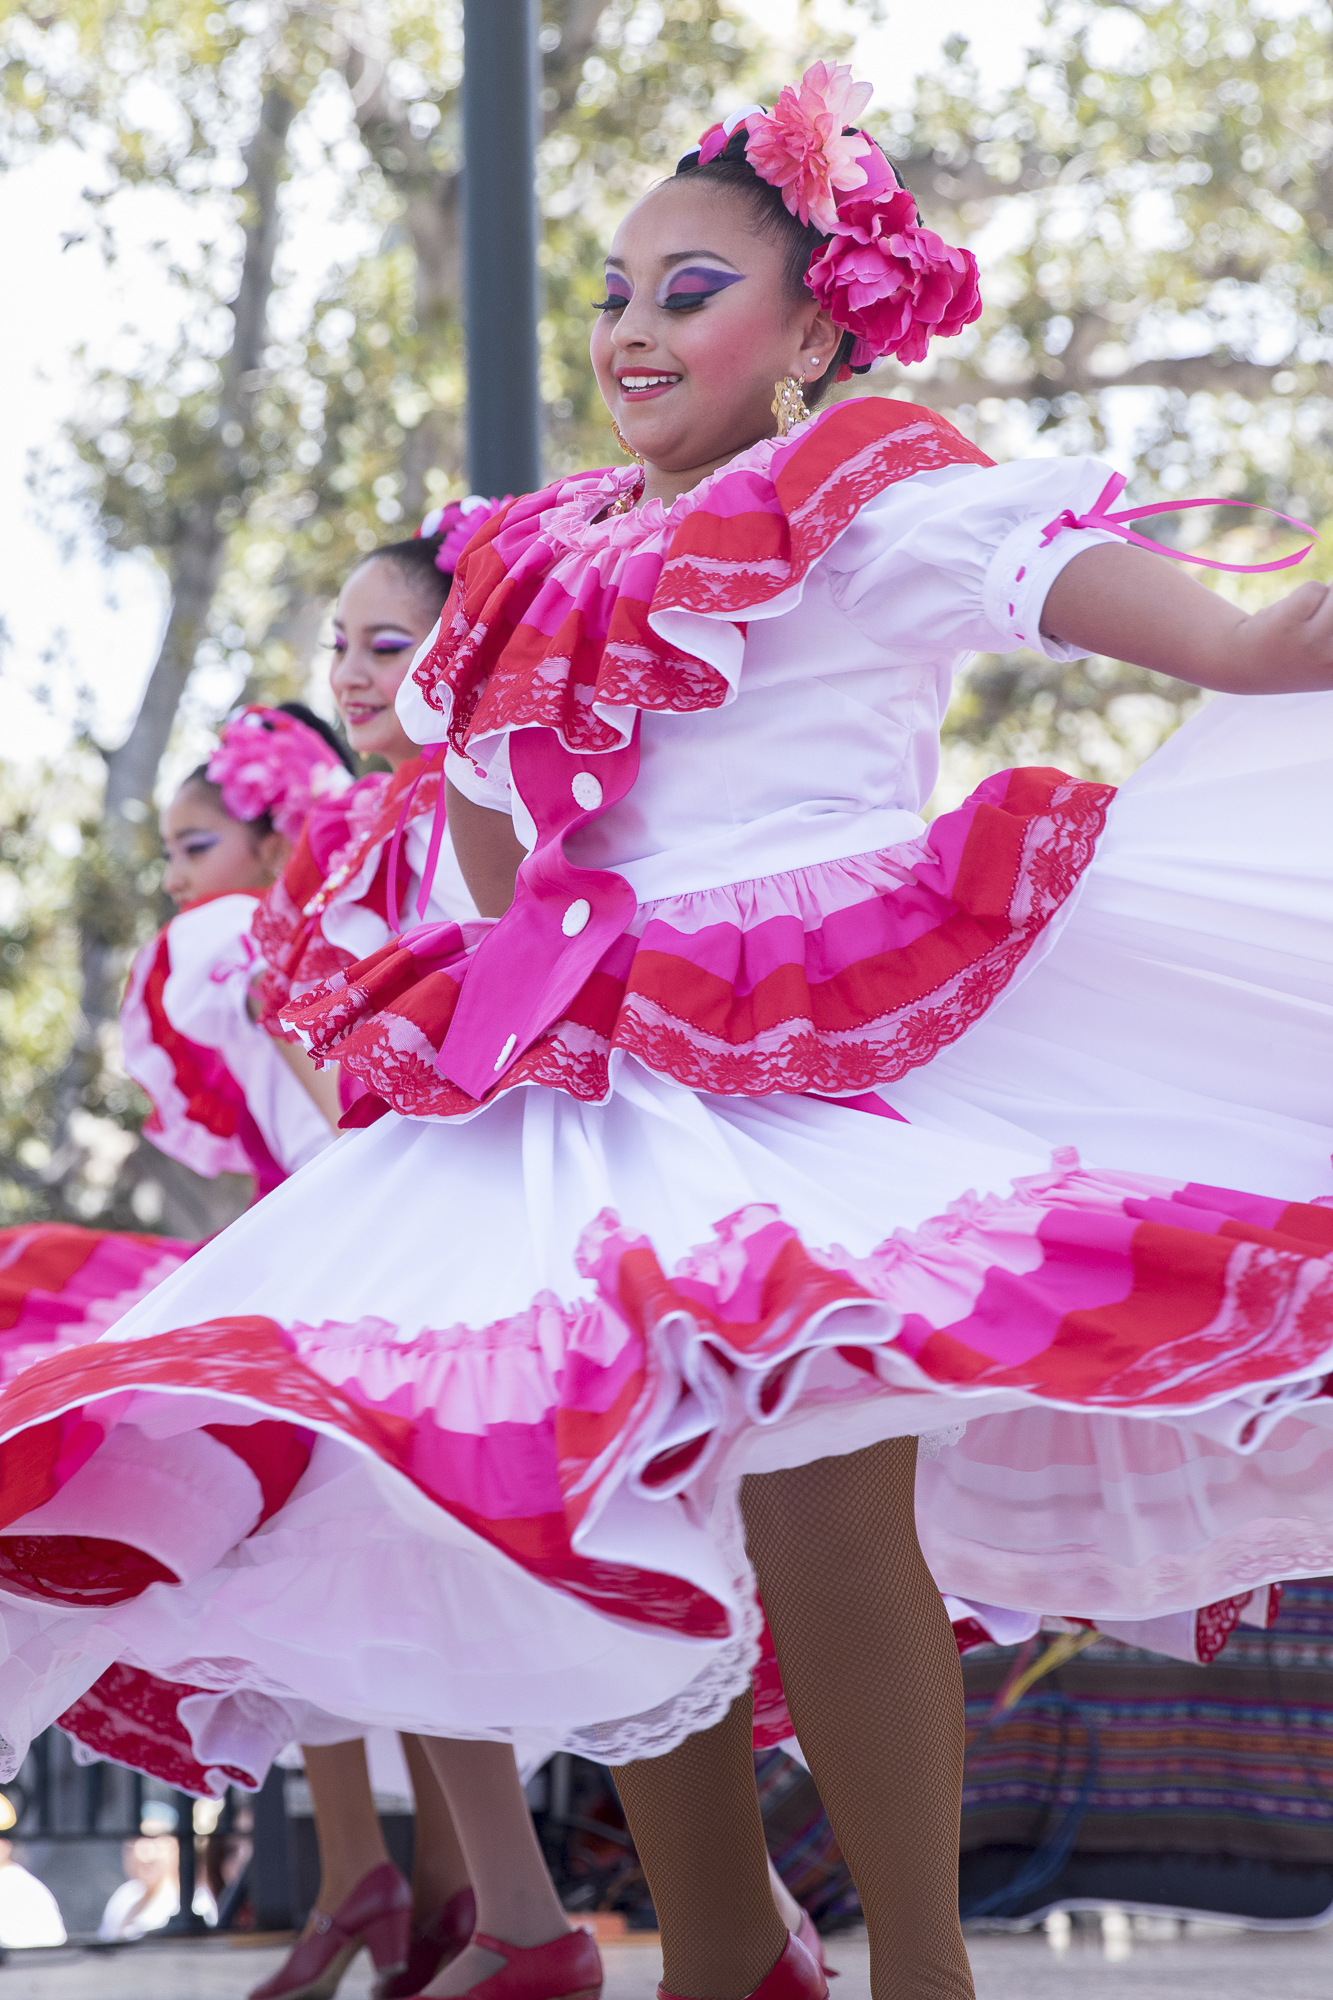  Children perform a traditional Folklora dance at Olvera Streets Cinco De Mayo celebration on May 5, 2018 in Downtown Los Angeles, California. (Zane Meyer-Thornton/Corsair Photo) 